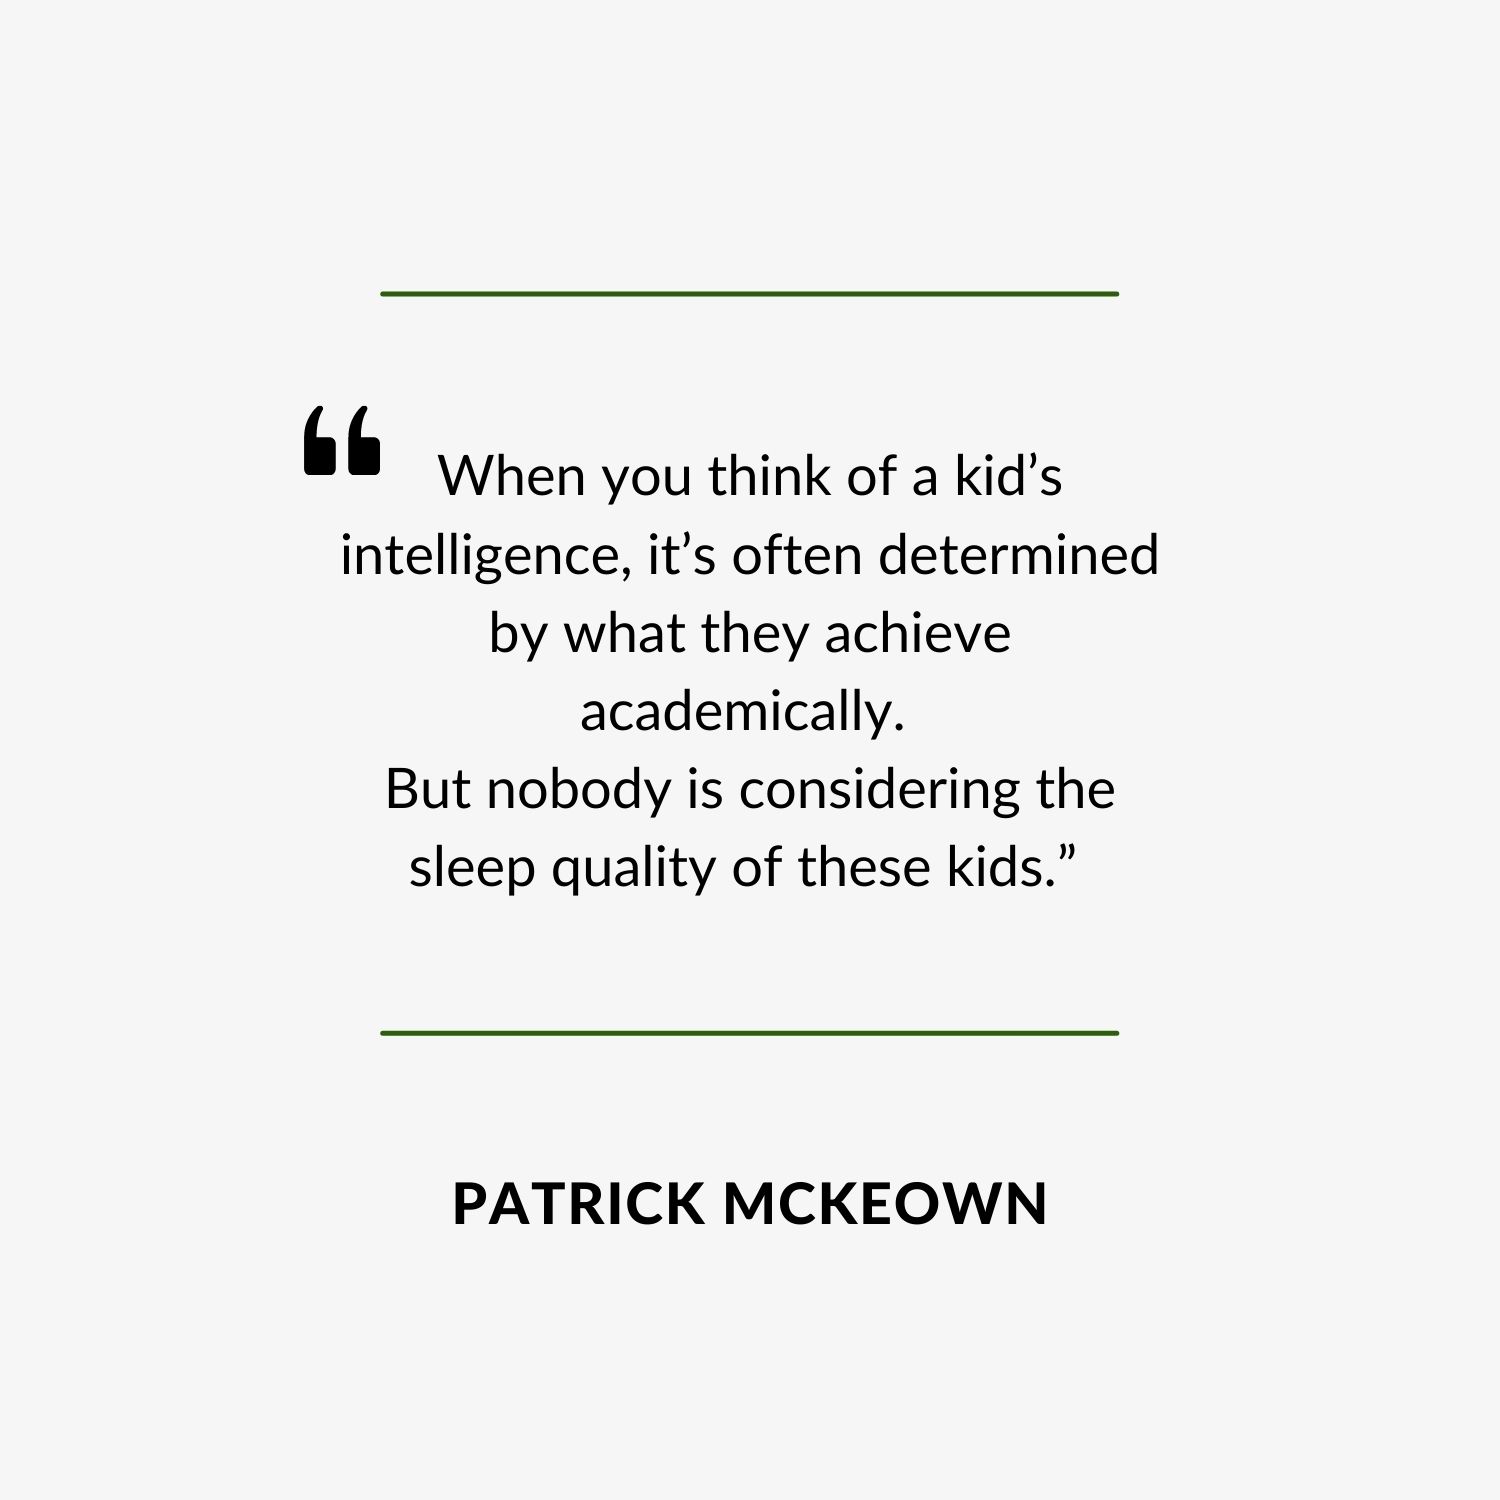 Quote - "When you think of a kid’s intelligence, it’s often determined by what they achieve academically. But nobody is considering the sleep quality of these kids.”  